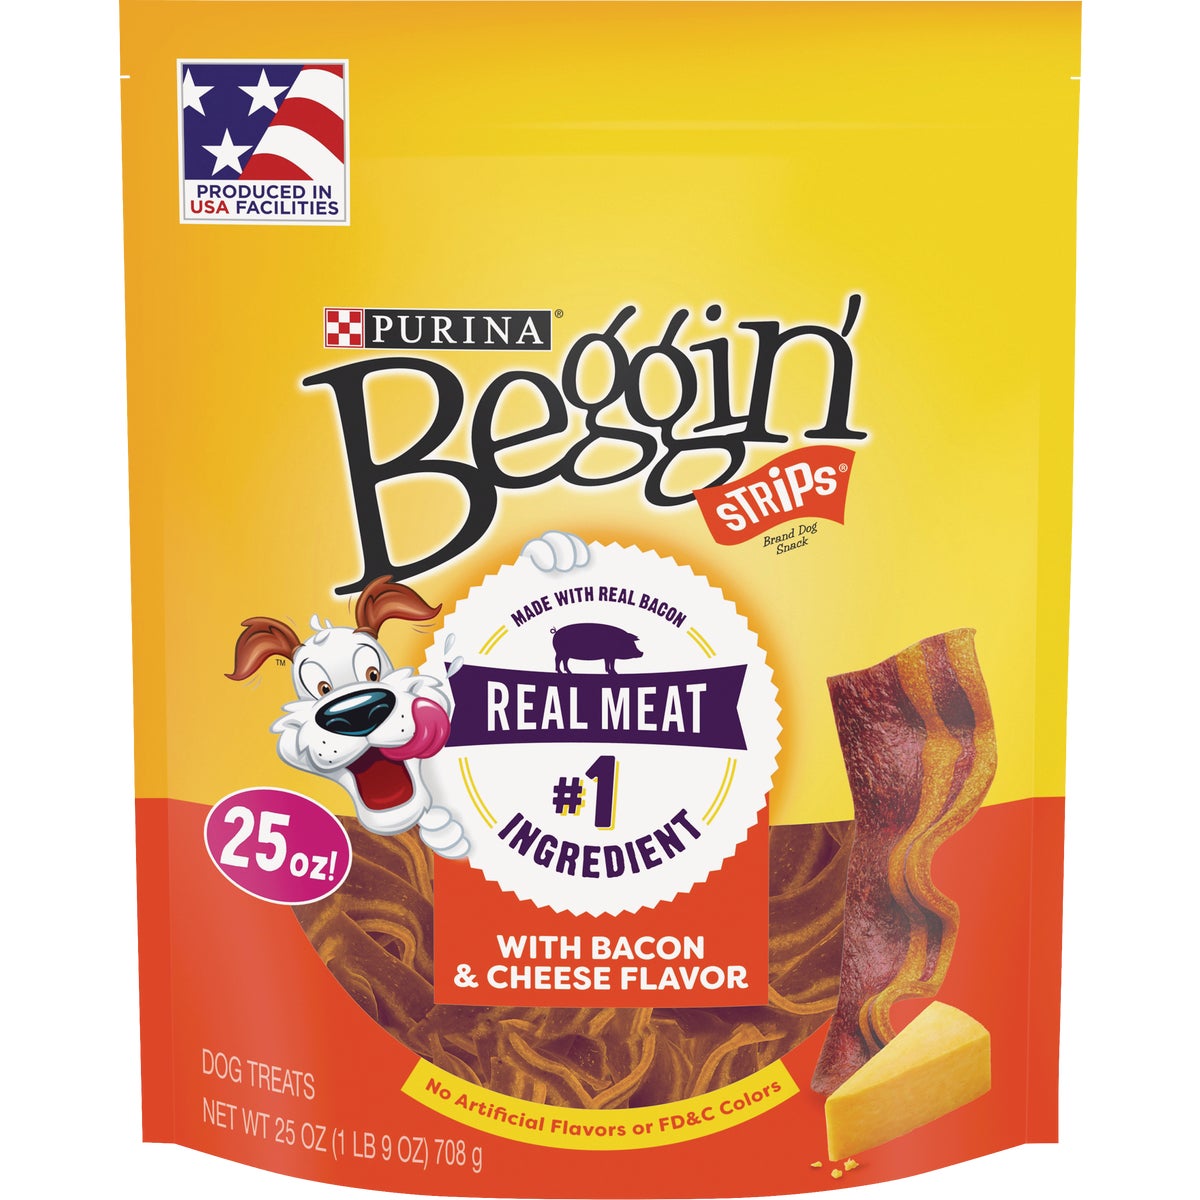 Purina Beggin' Strips Bacon & Cheese Flavor Chewy Dog Treat, 25 Oz.